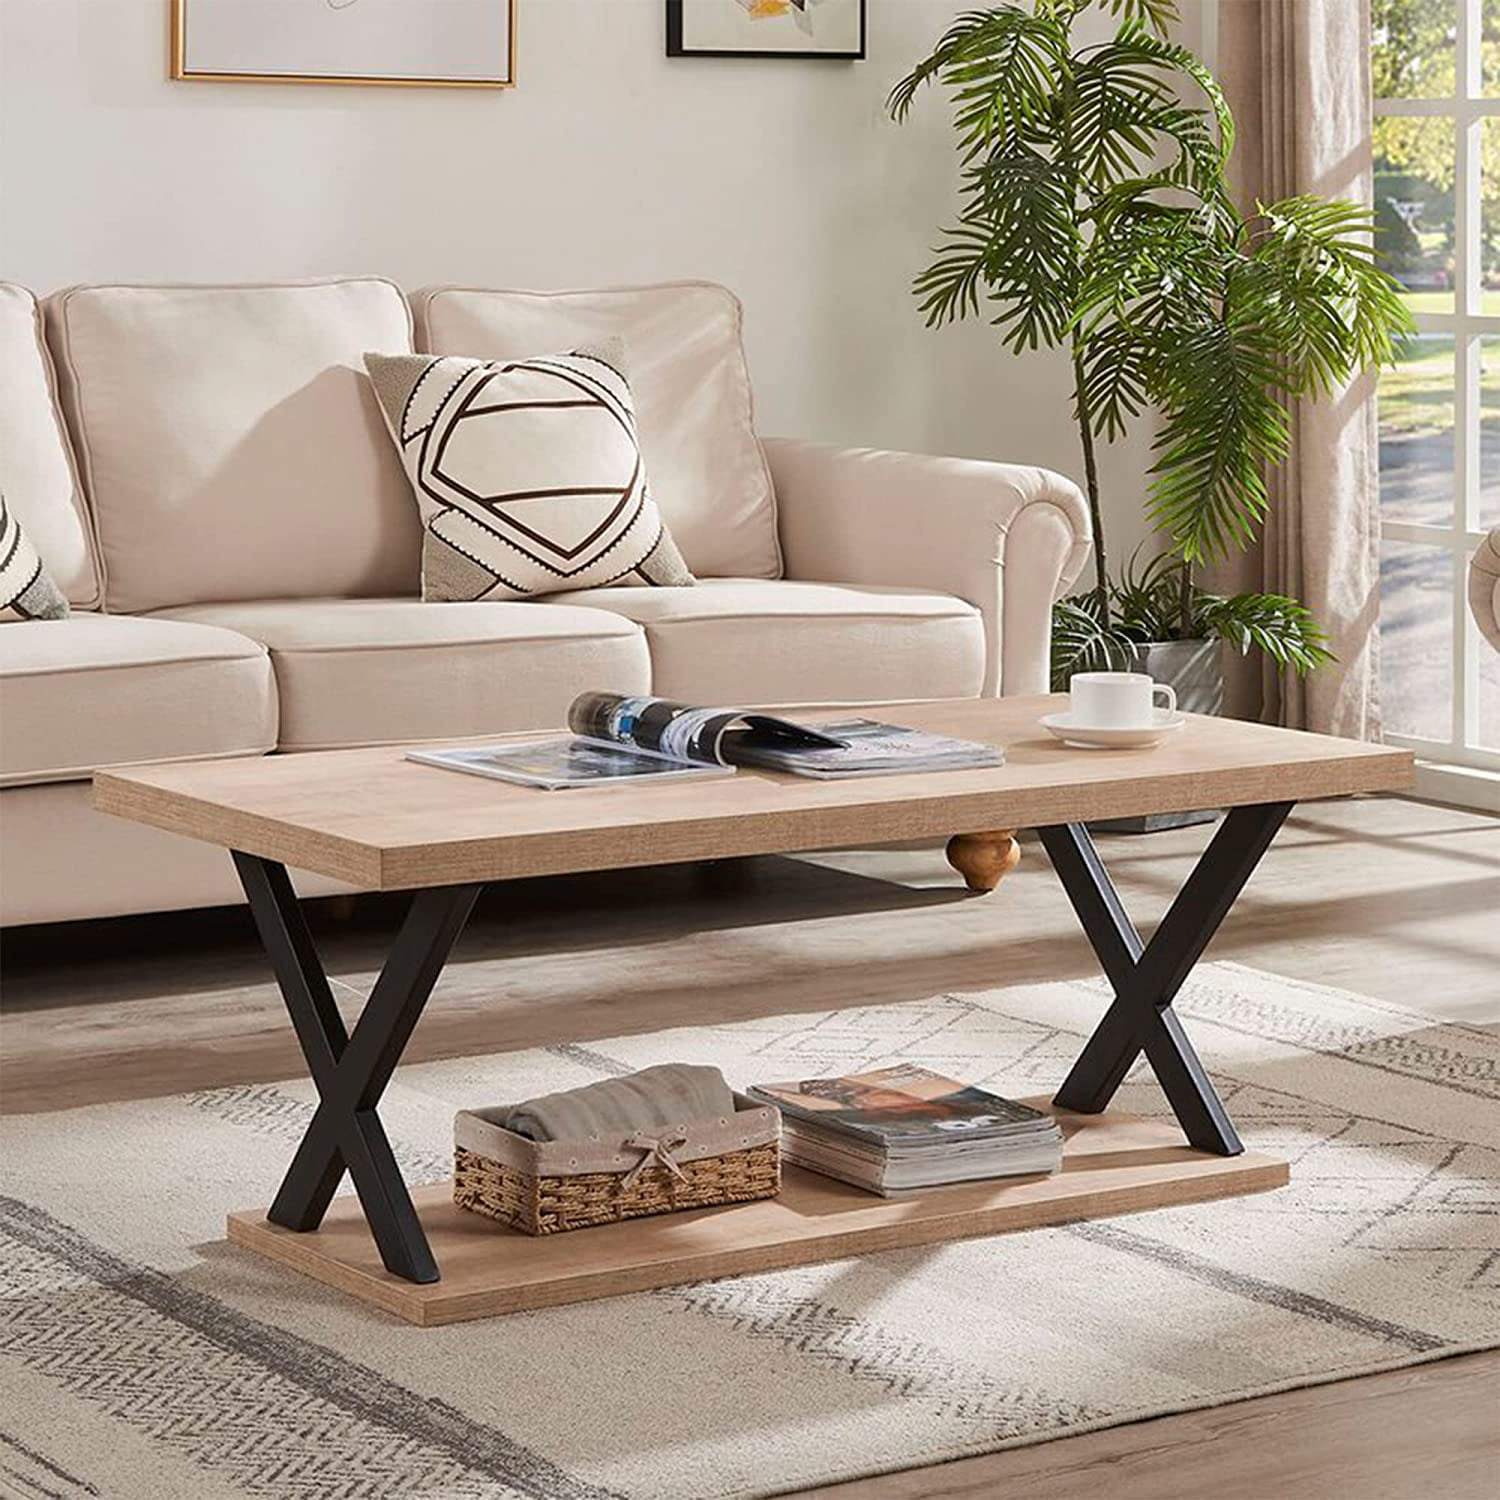 Double Layer Living Room Coffee Table Home Office Small Table Room Furniture NEW 